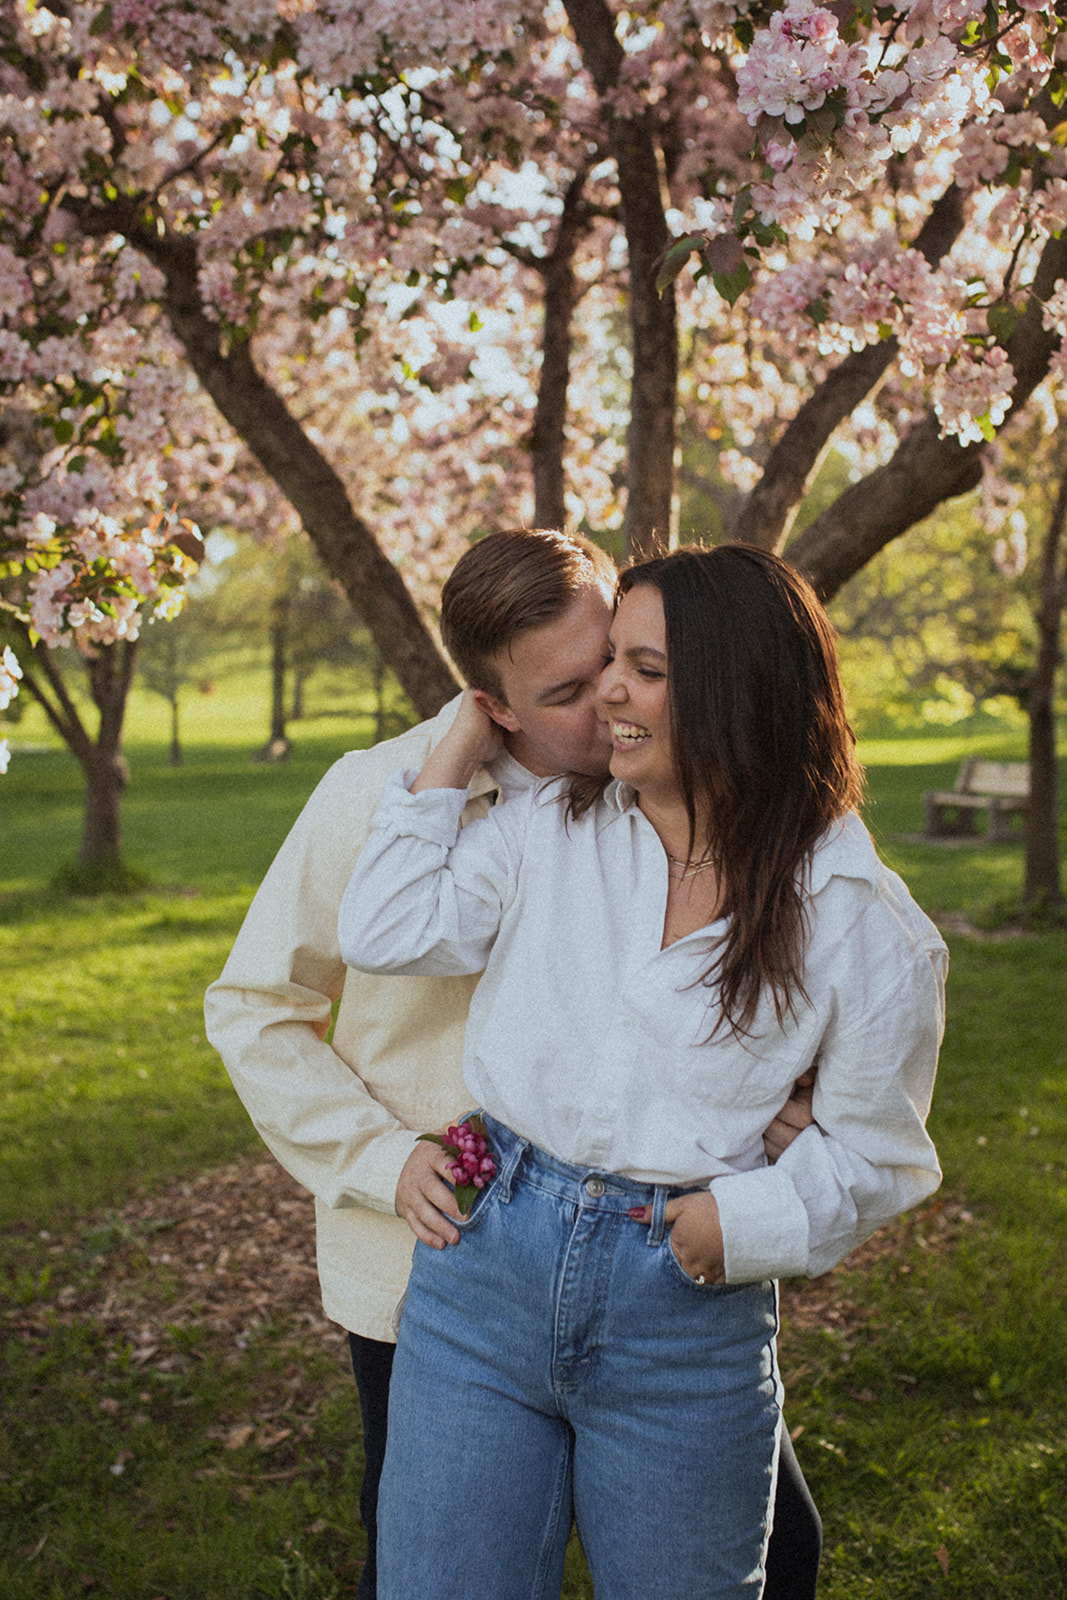 couple embracing each other and laughing together at sunrise under flowering trees